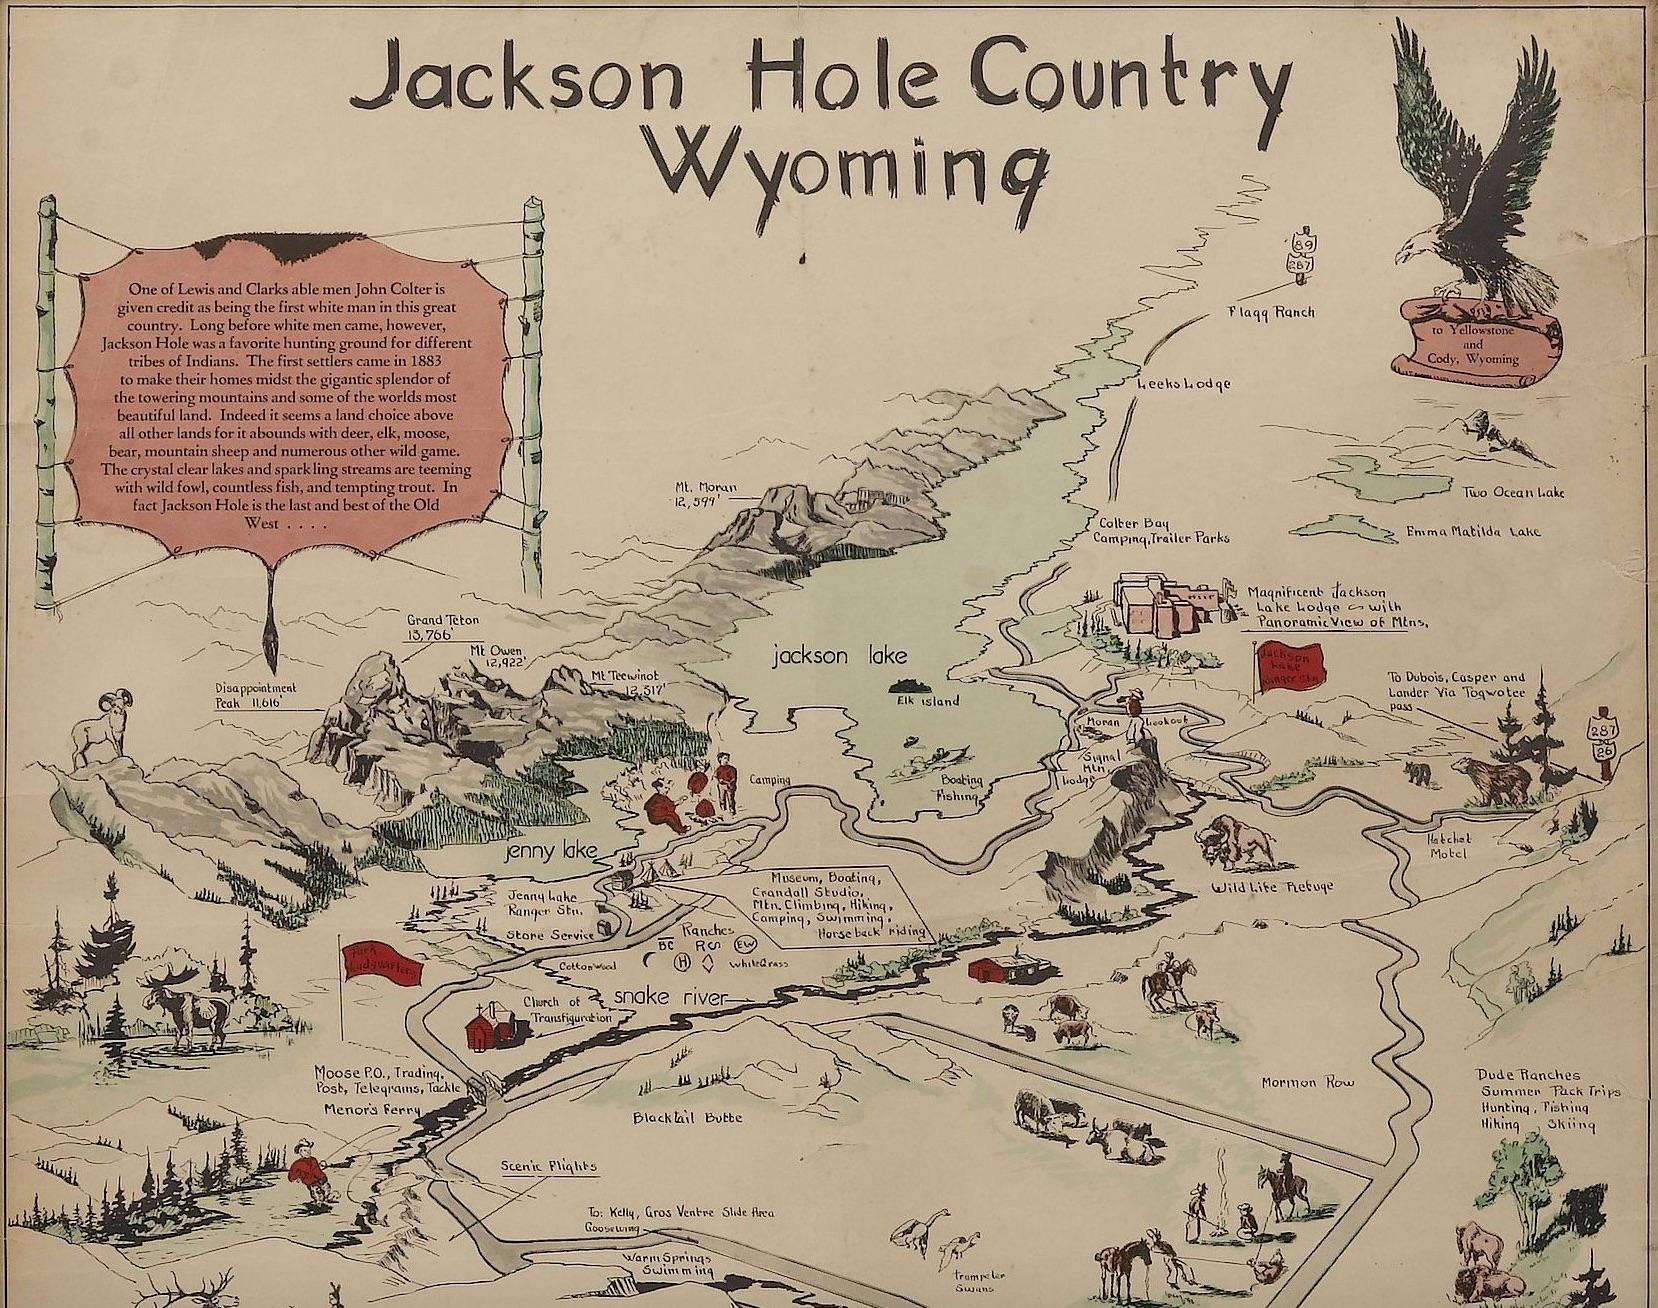 This is an attractive and rare 1956 pictorial view map of Jackson Hole, Wyoming, drawn by Harold Isadore Hopkinson. Oriented to the northwest, the map covers roughly from Jackson Lake in Grand Teton National Park to the town of Jackson, appearing in